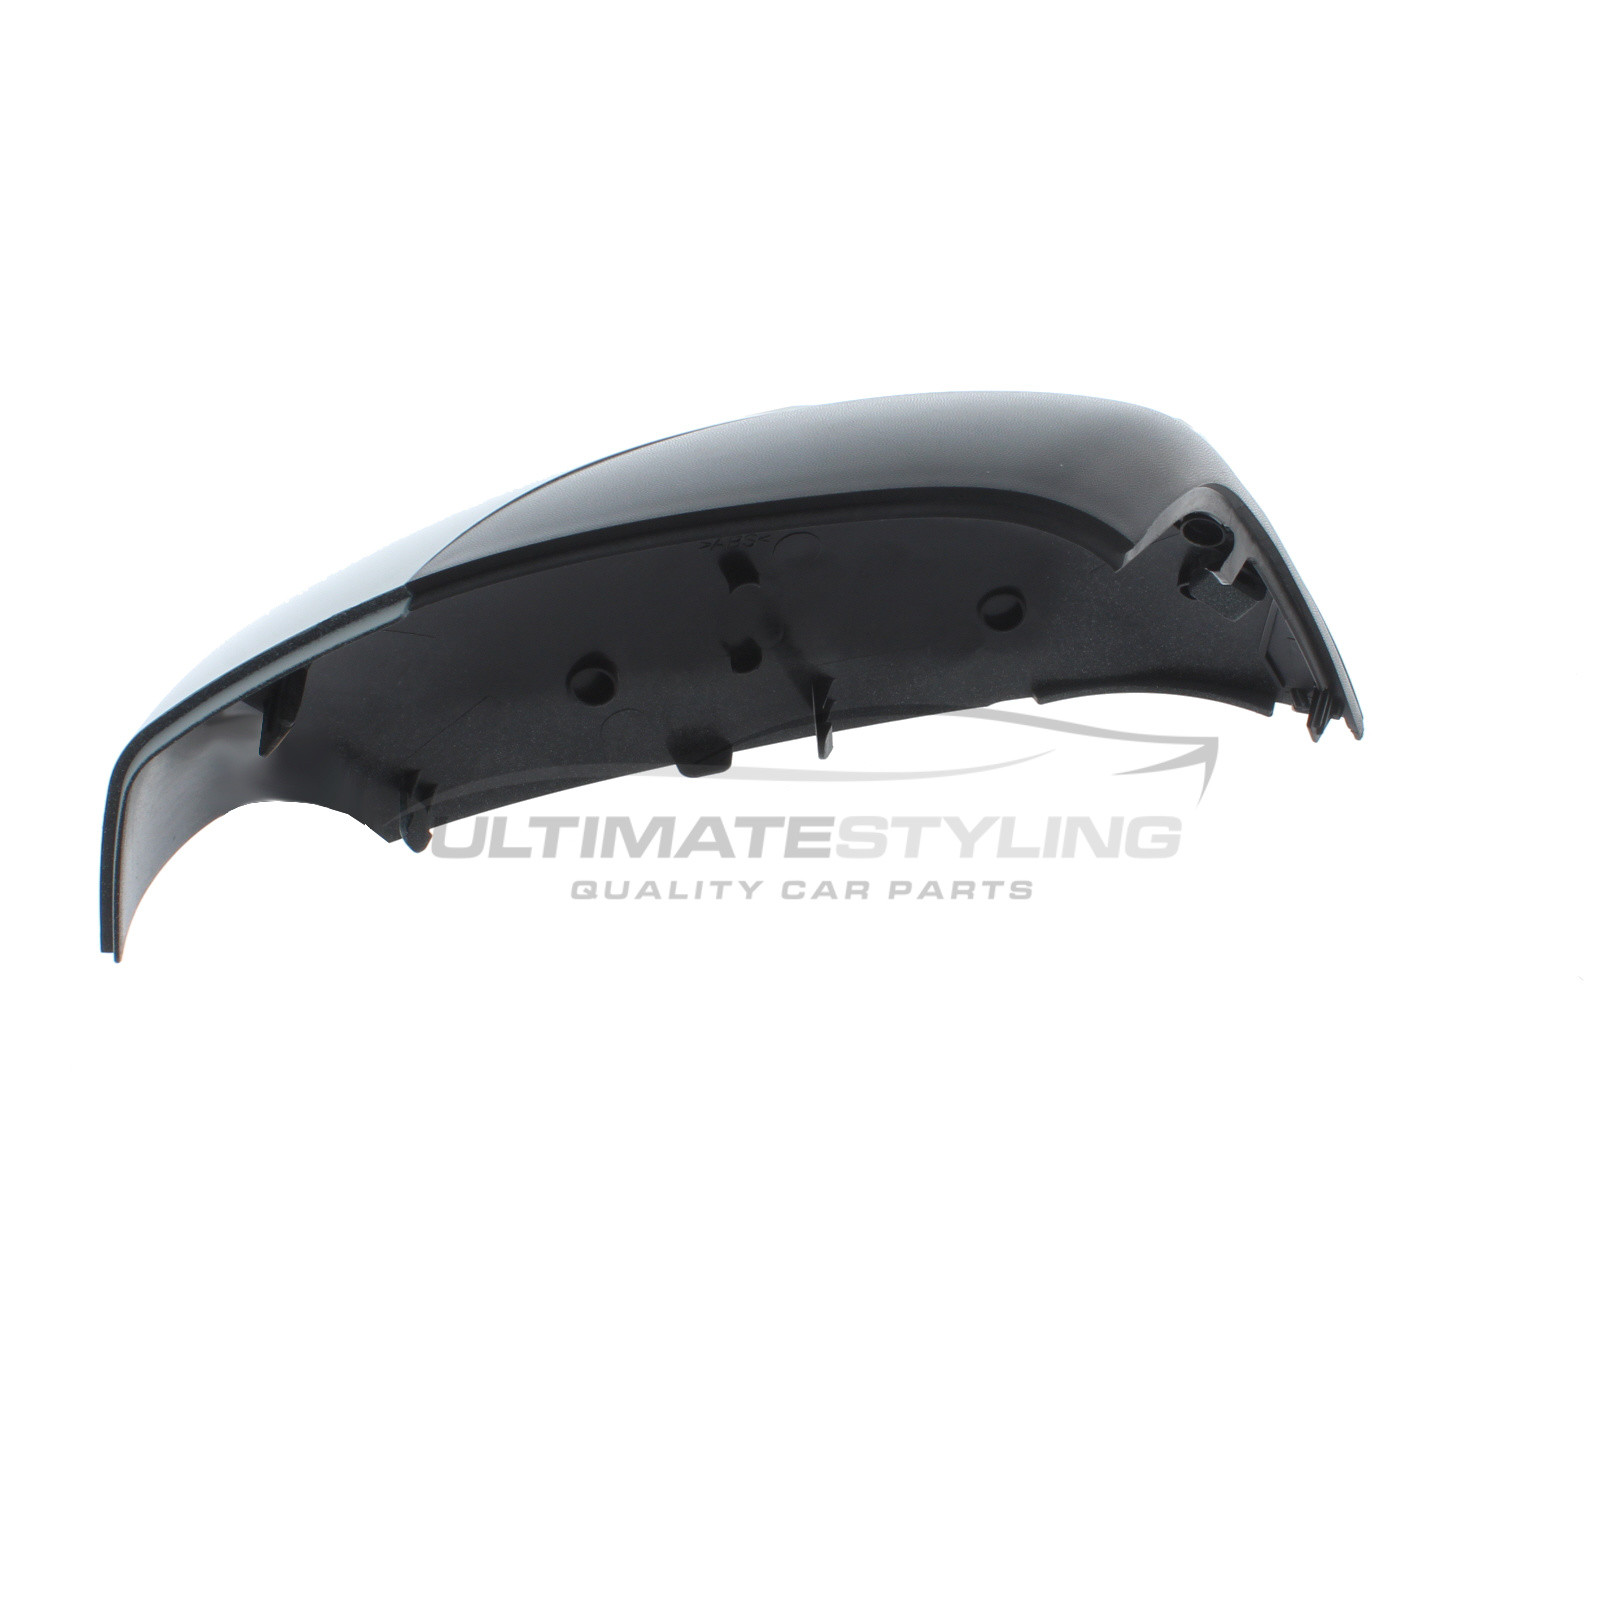 Renault Scenic Wing Mirror Cover to buy at-l